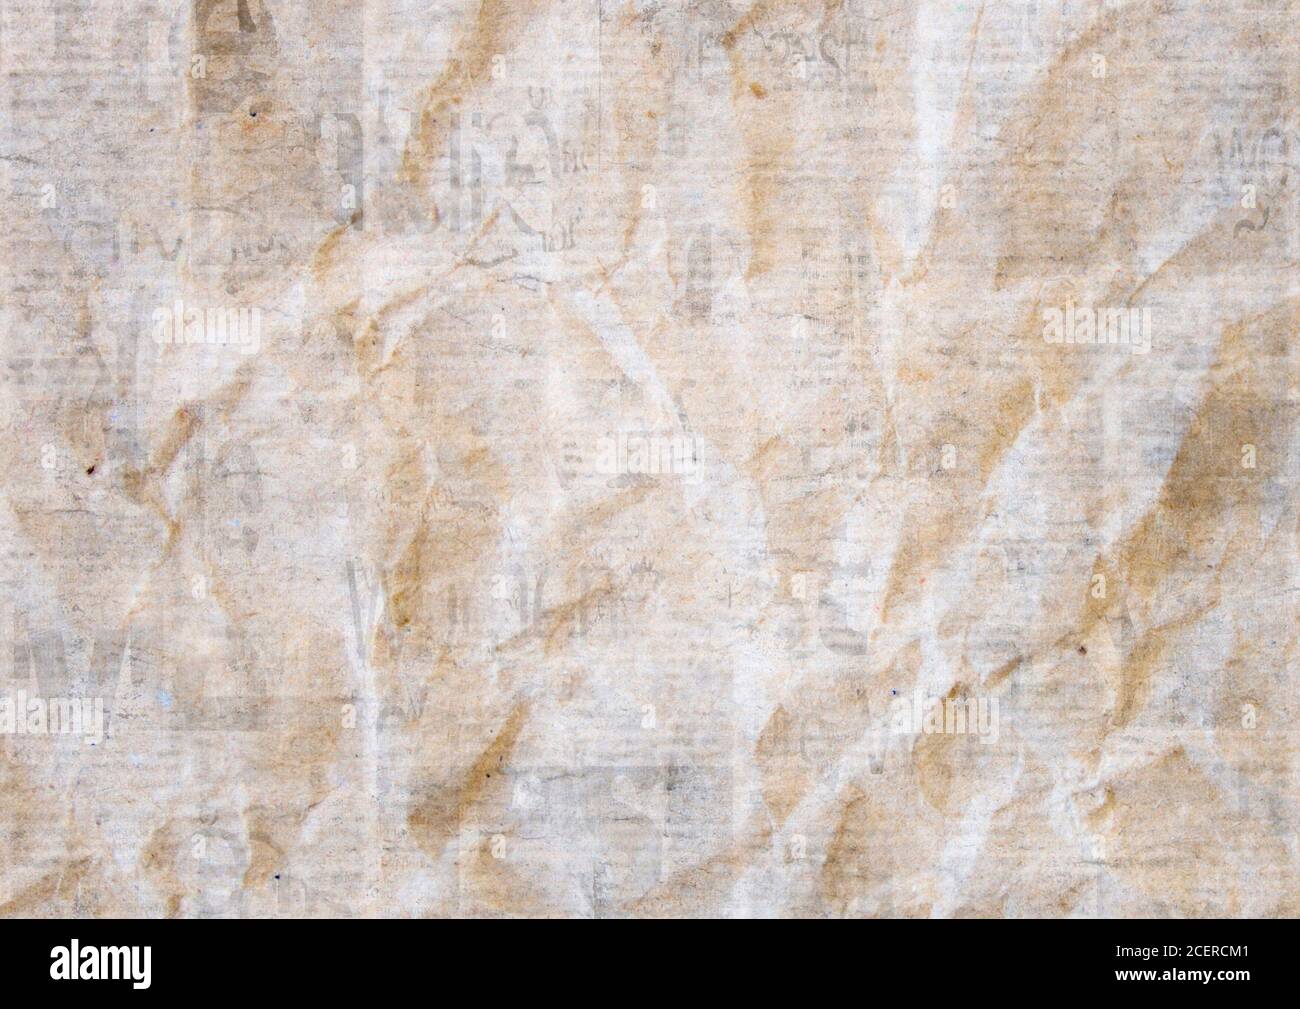 Vintage grunge newspaper paper texture background. Blurred old crumpled  newspapers backdrop. A blur unreadable aged news page with place for text.  Gra Stock Photo - Alamy